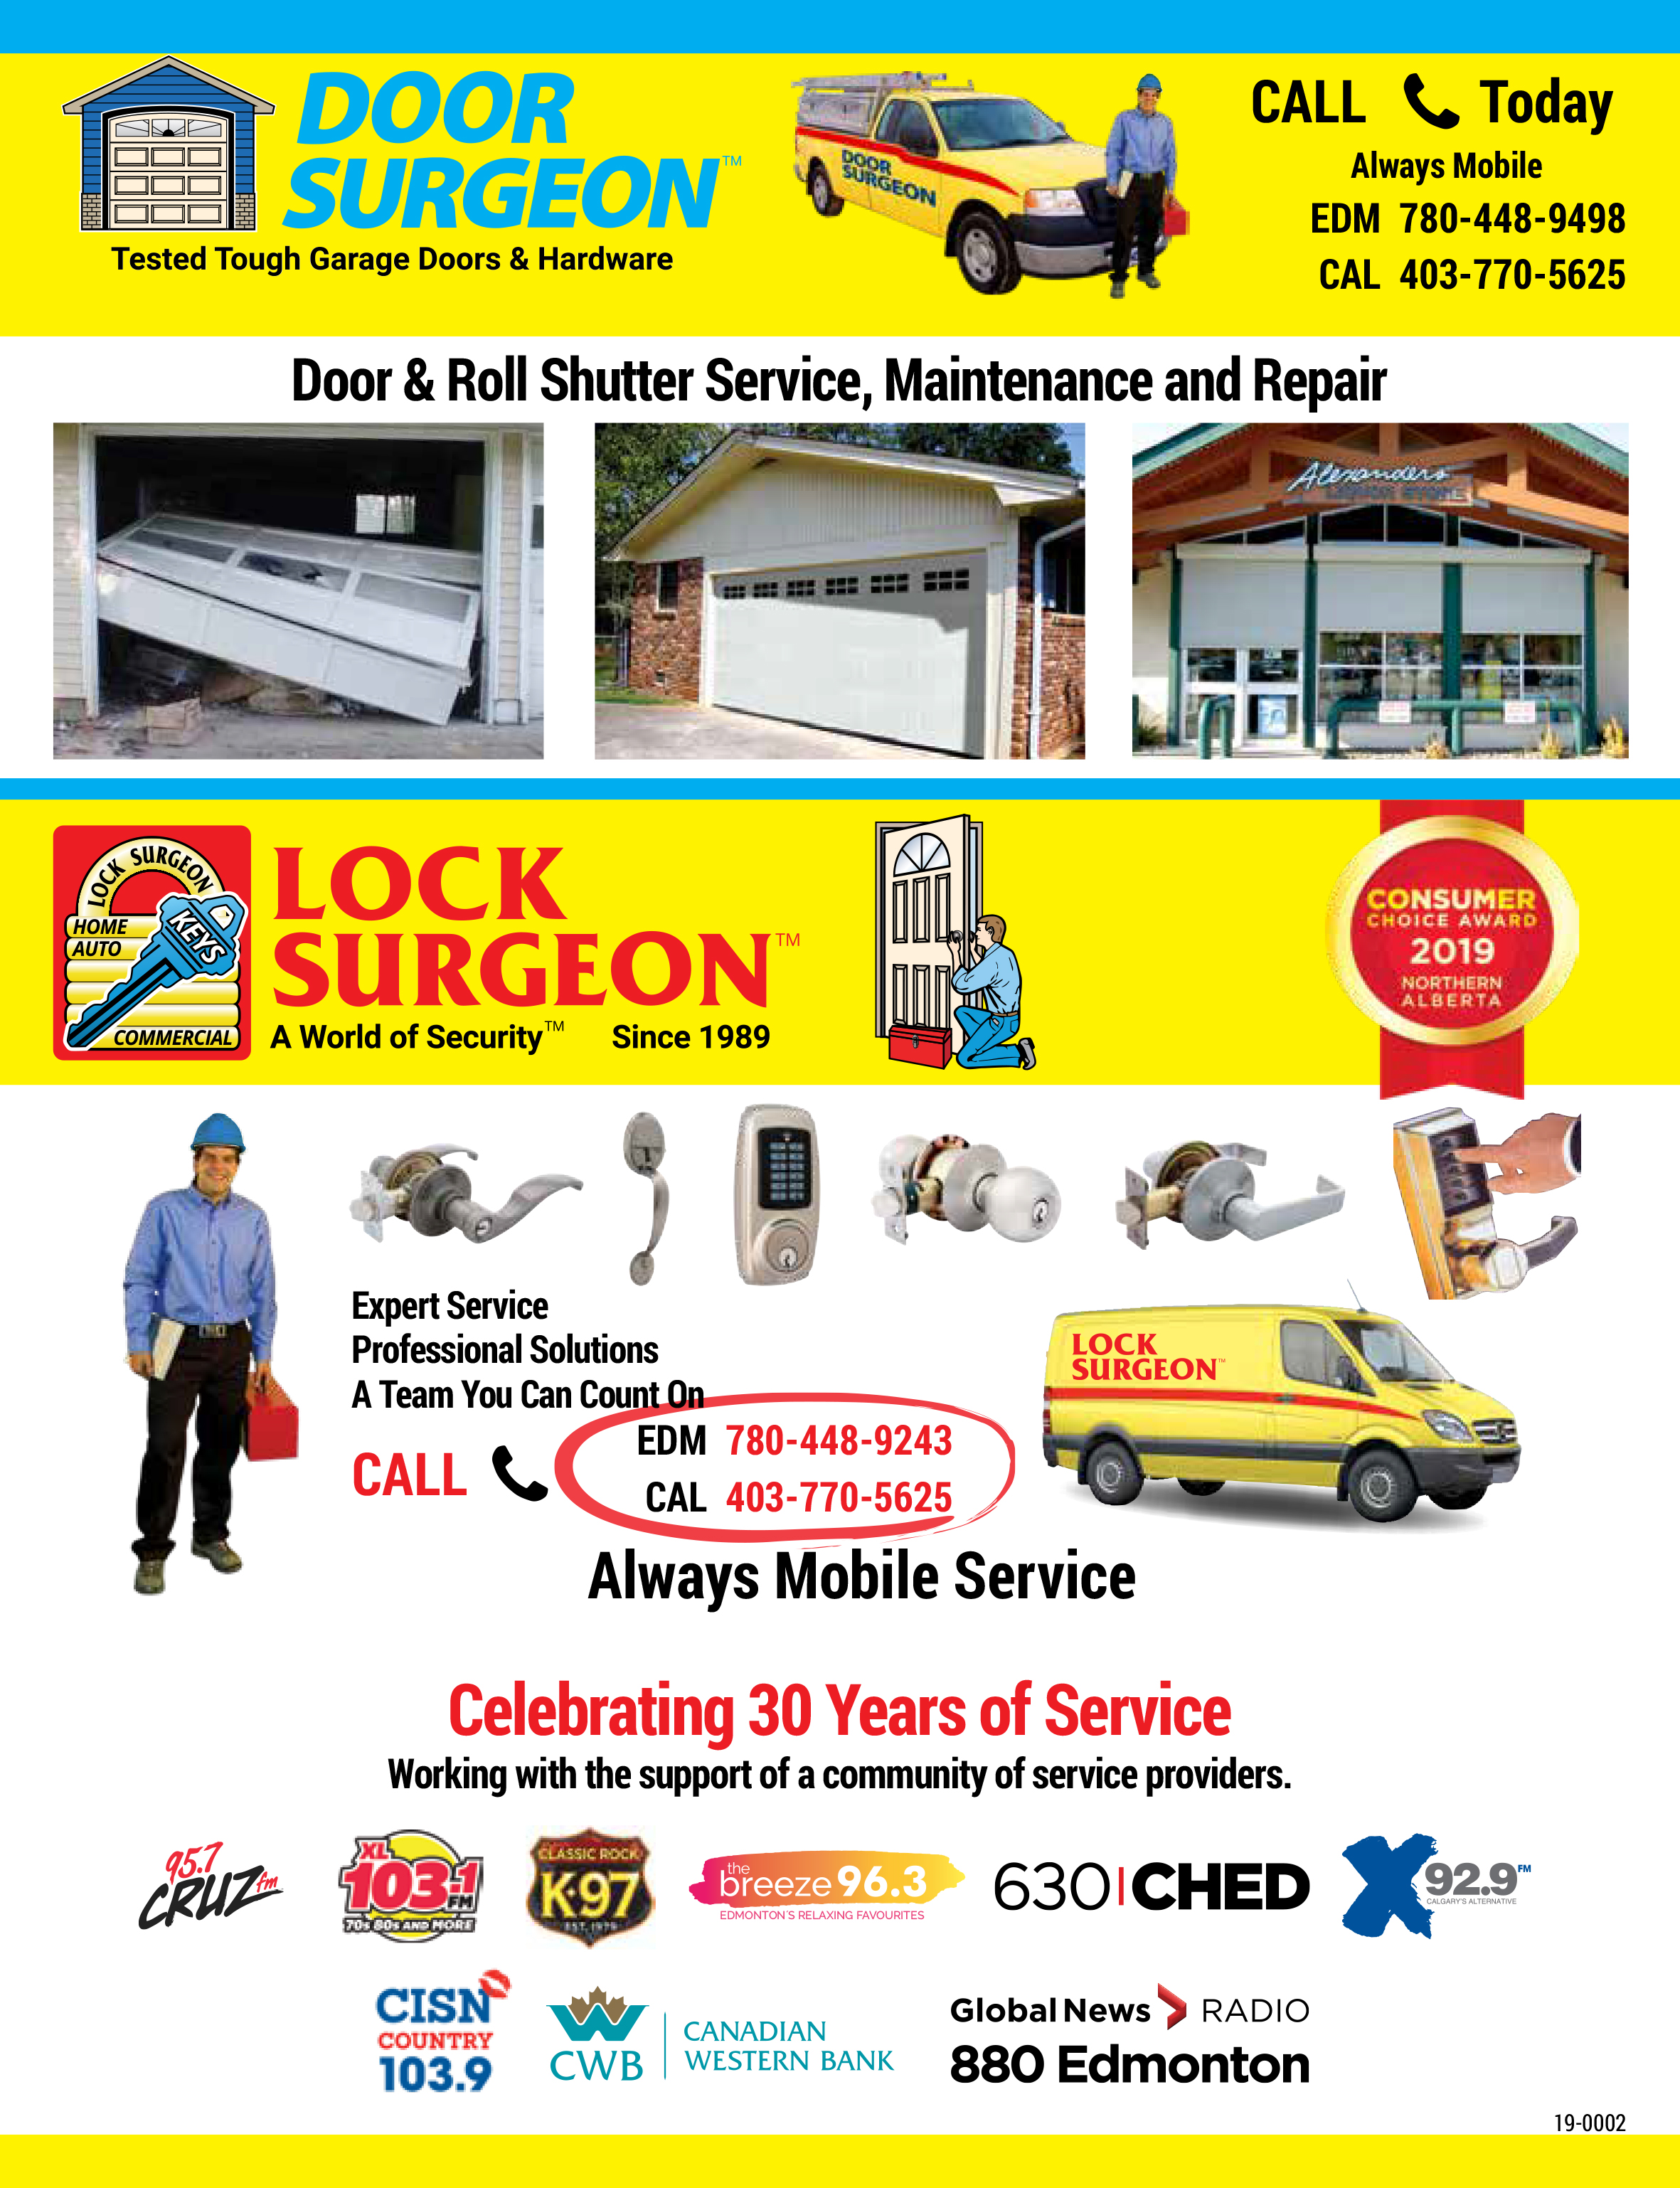 Door Surgeon professional service providers can fix, repair or replace doors of every kind.